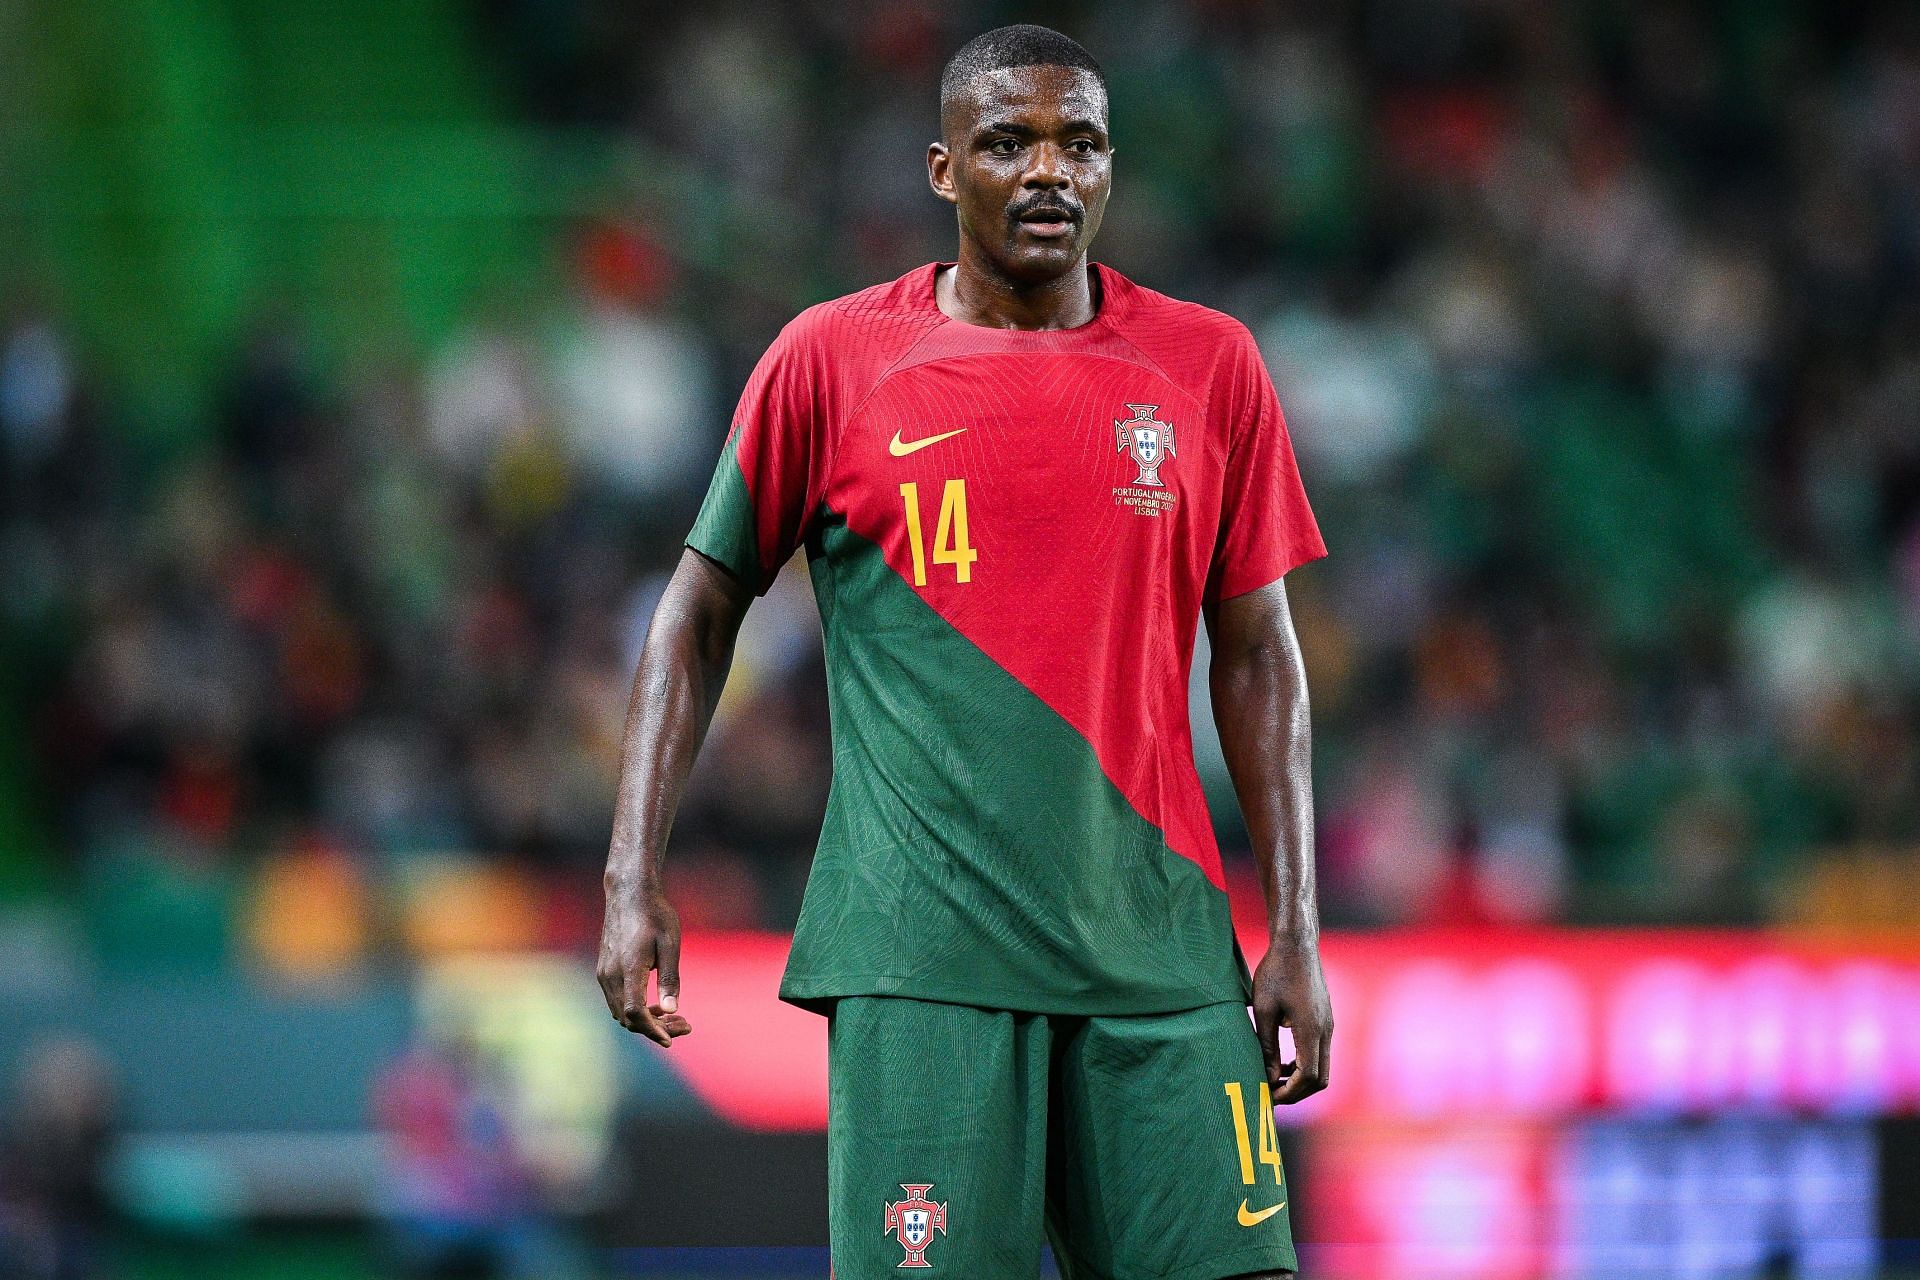 William Carvalho is likely to return to the starting XI against Uruguay